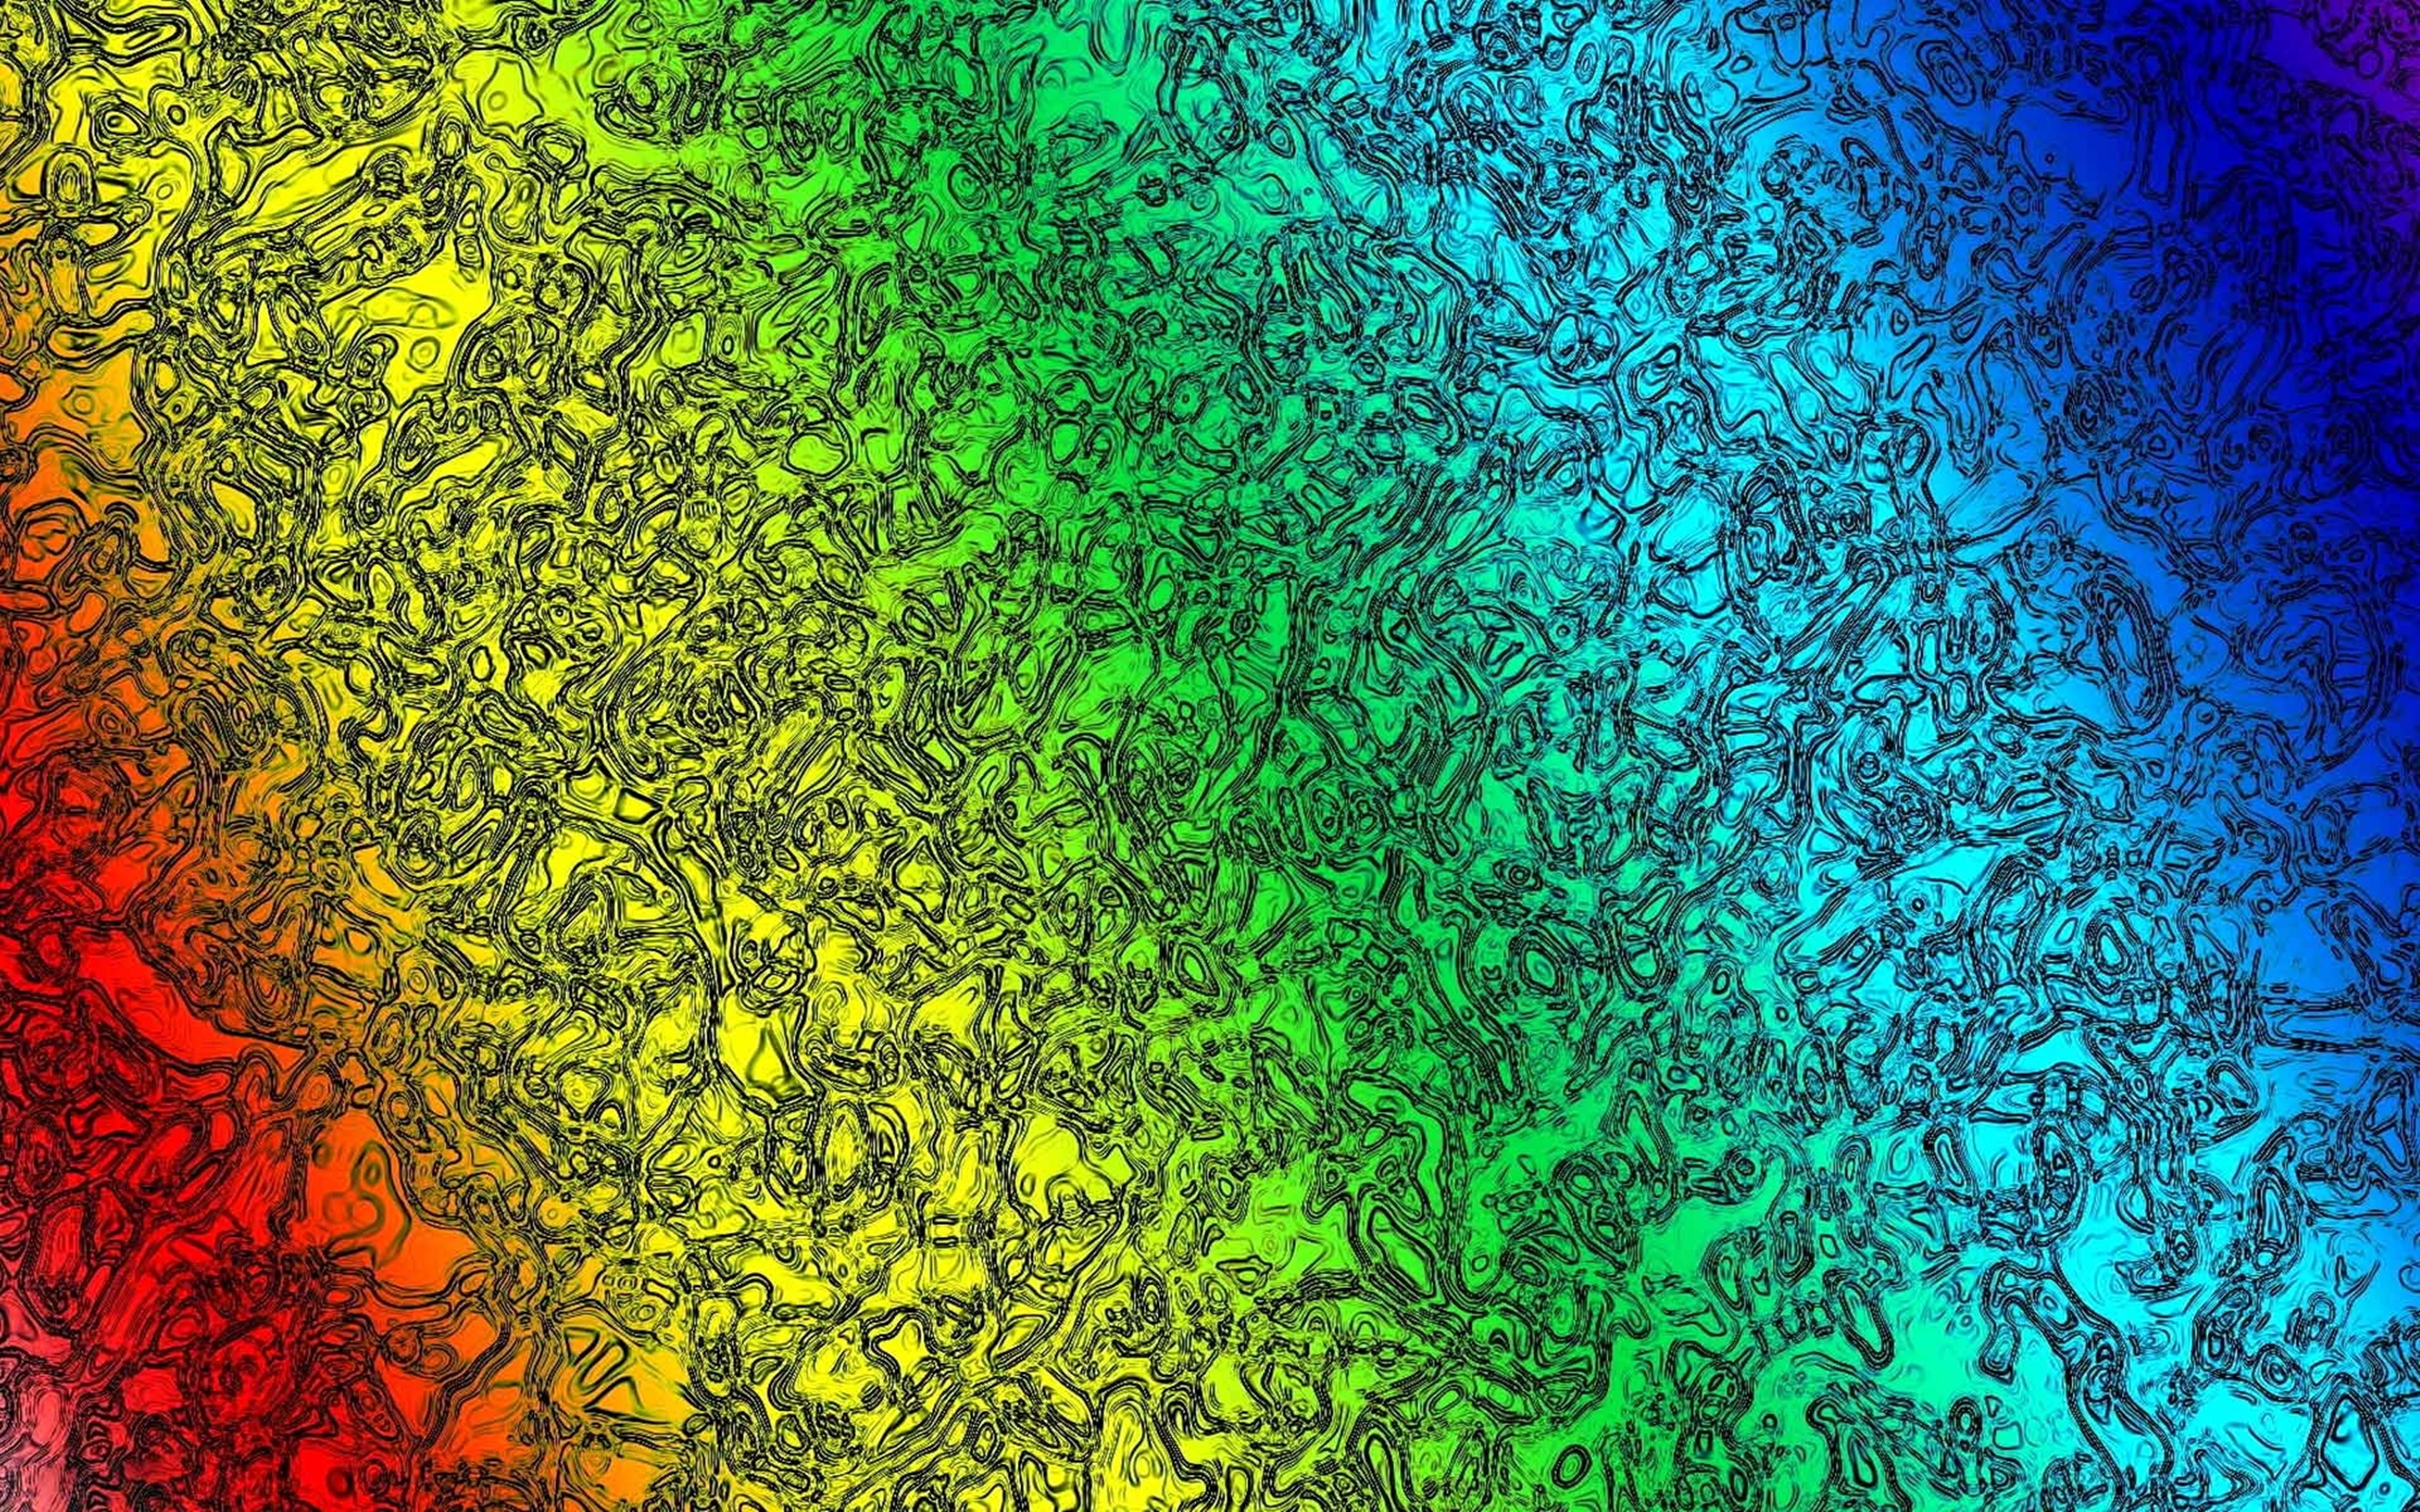 Rainbow Water Abstract Wallpaper 2560x1600 Wallpapers13.com